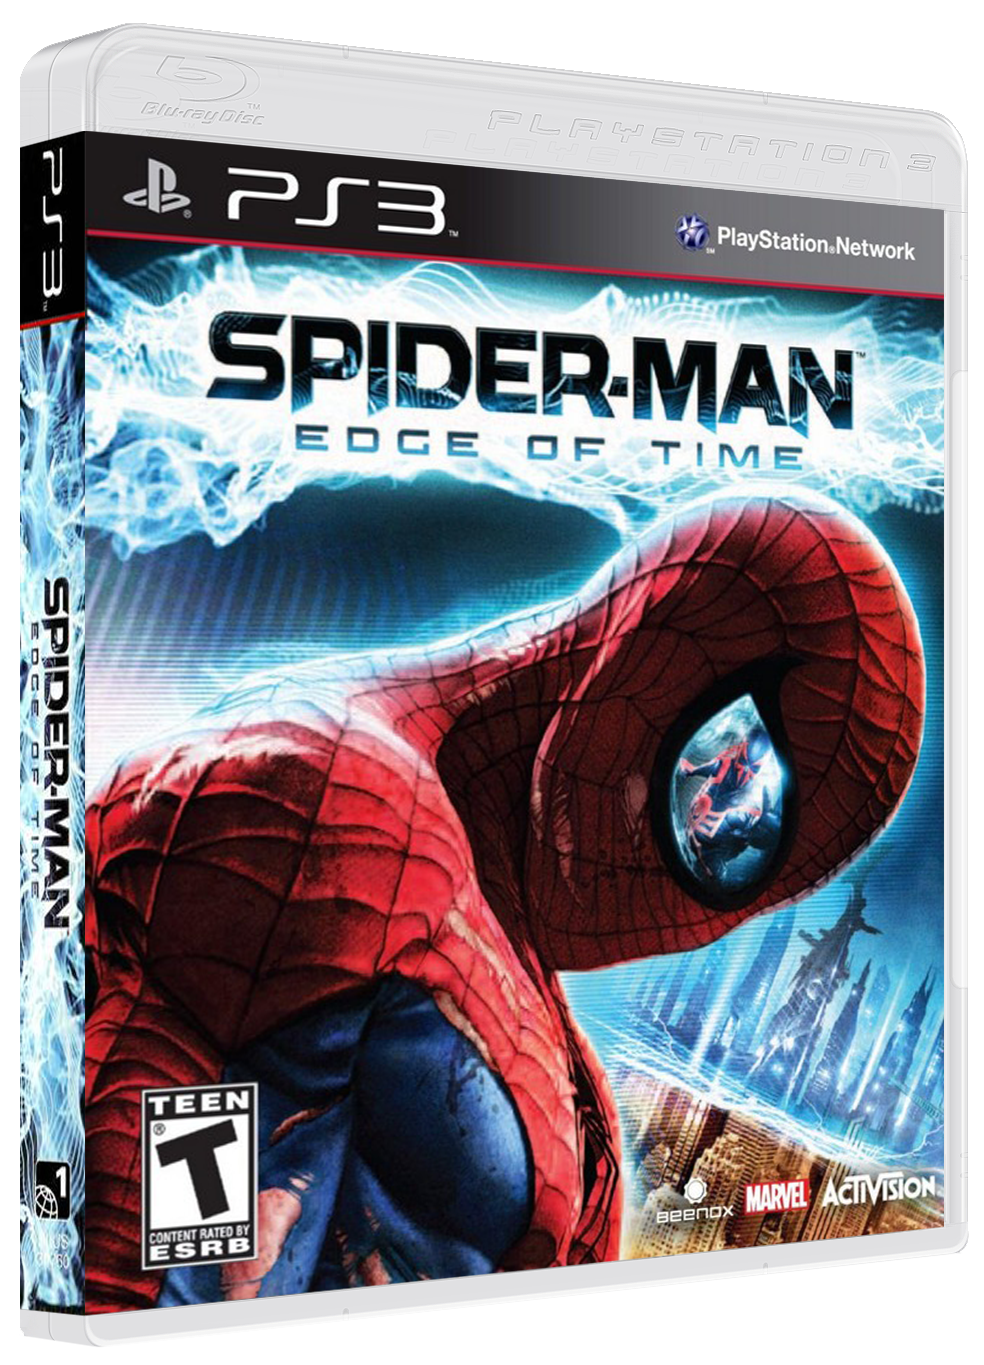 Spider-Man: Edge of Time Images - LaunchBox Games Database